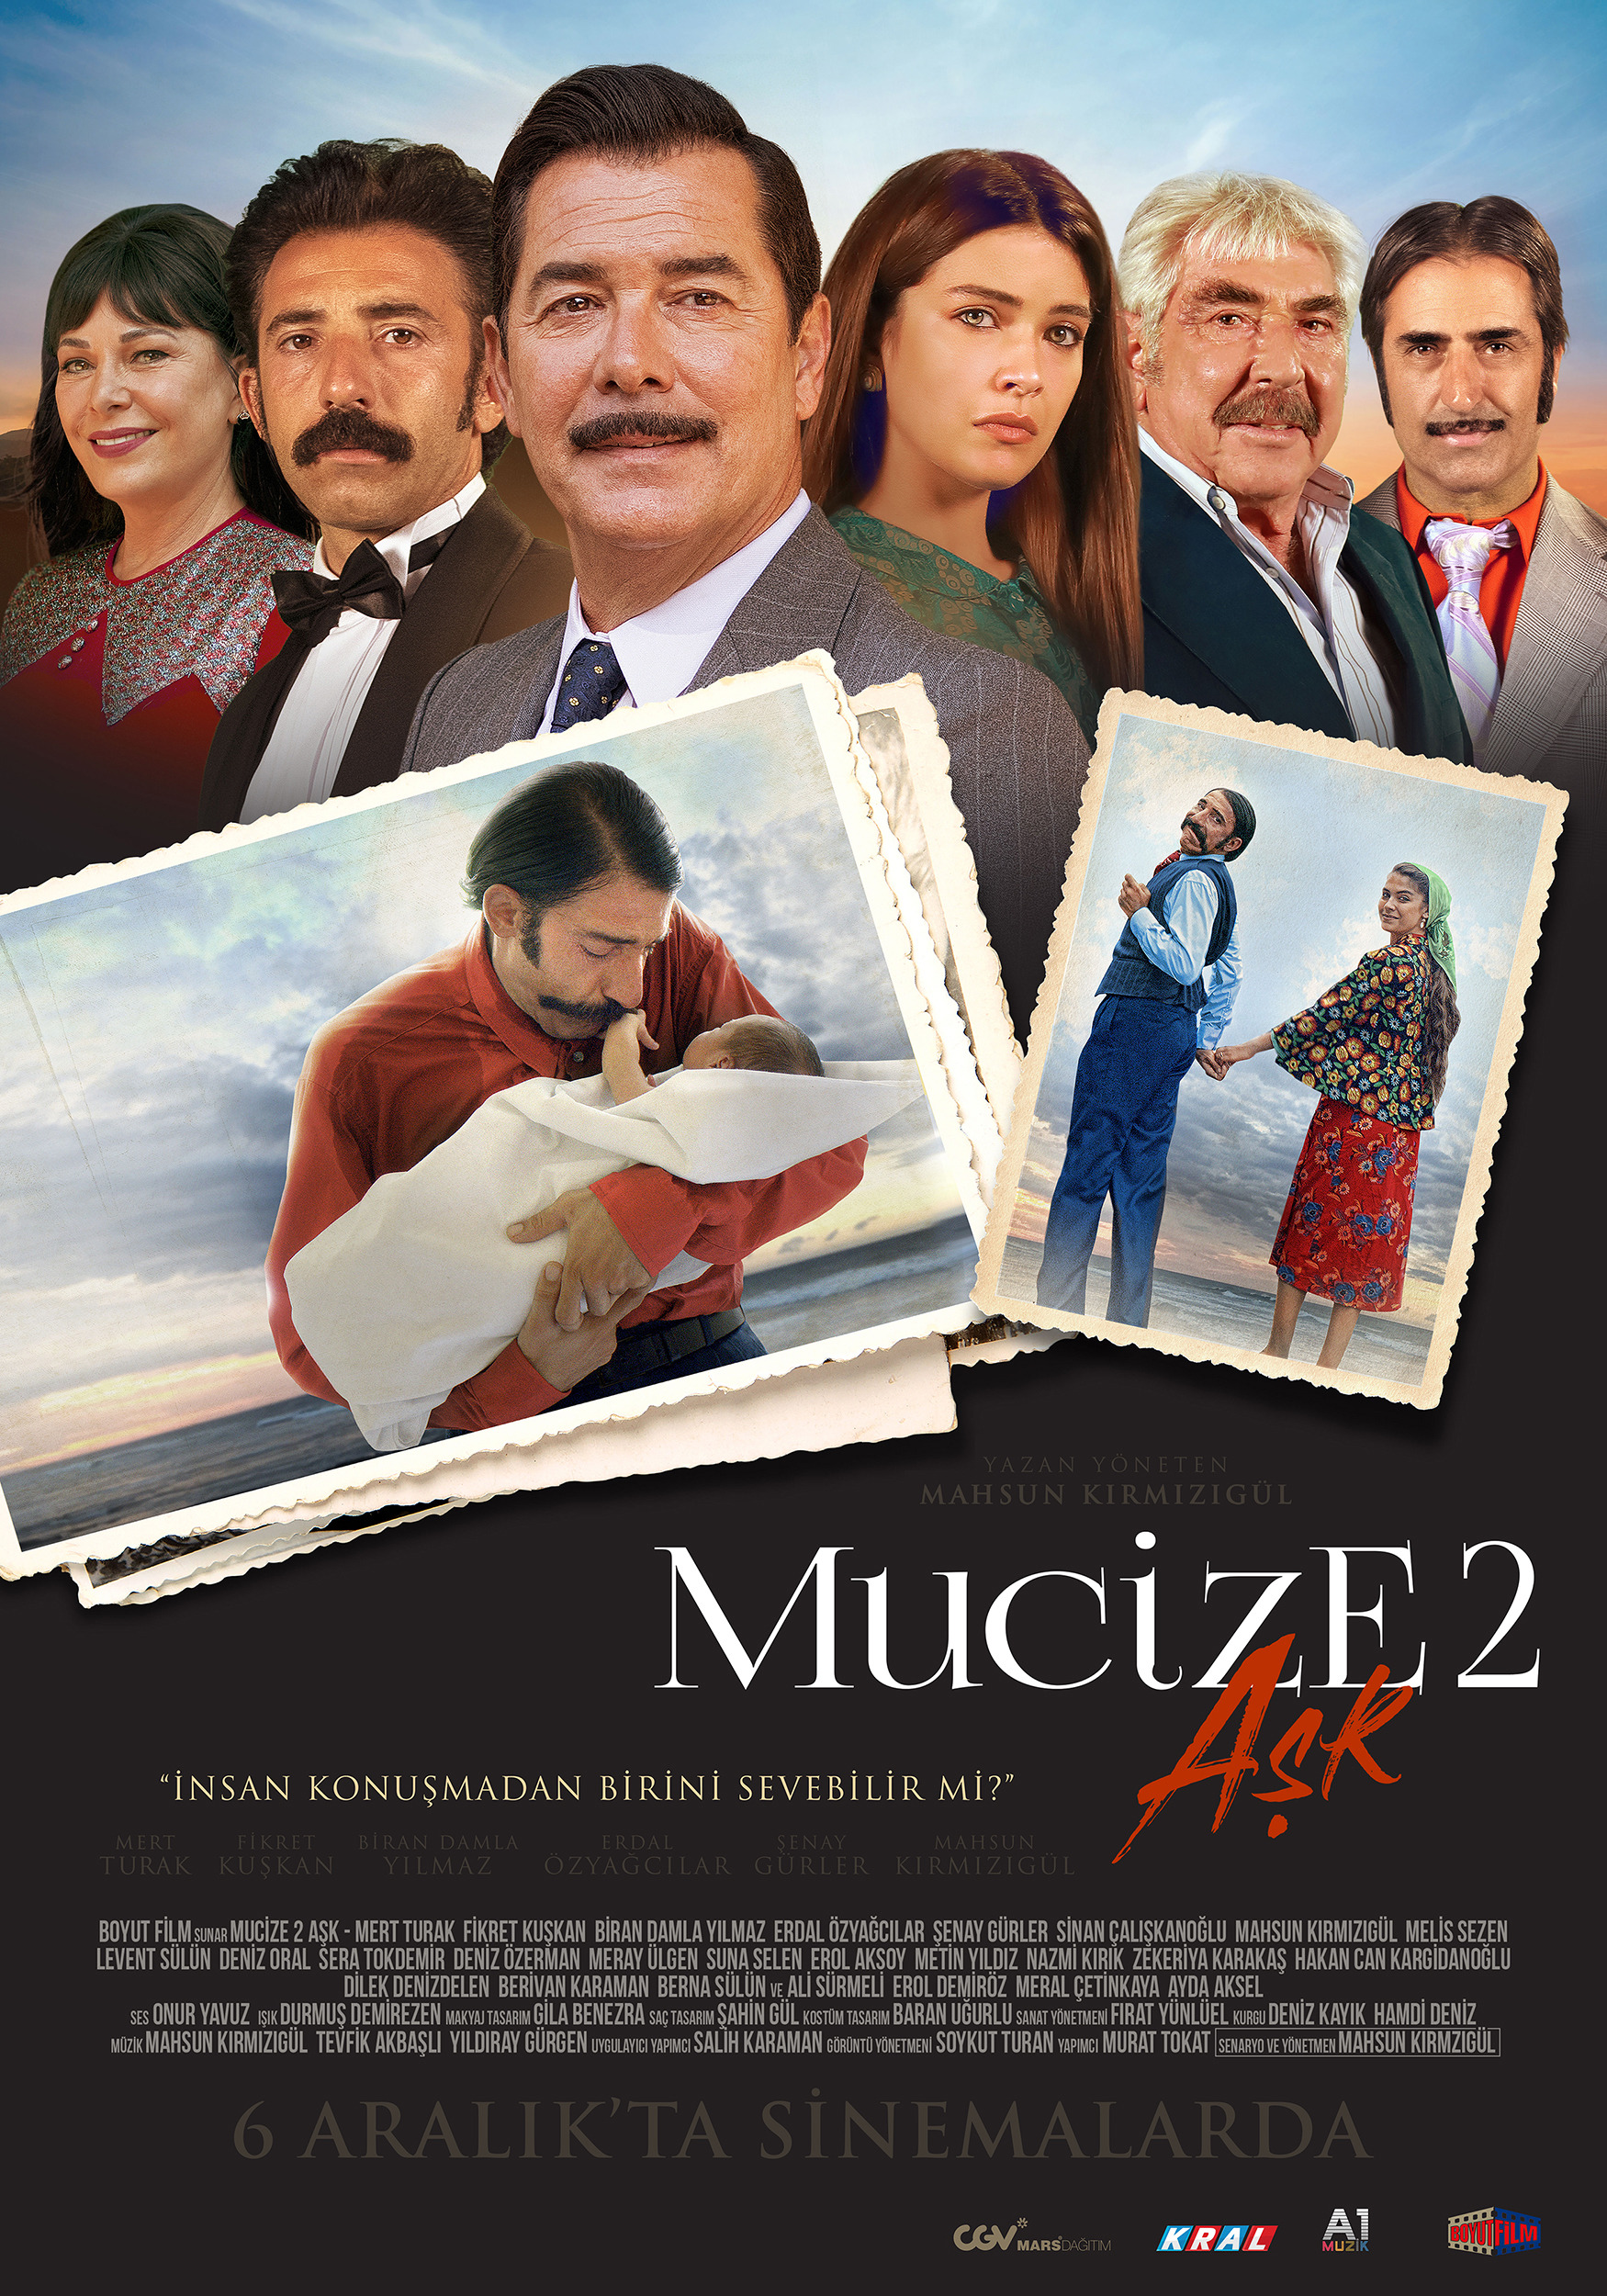 Mega Sized Movie Poster Image for Mucize 2: Ask (#3 of 4)